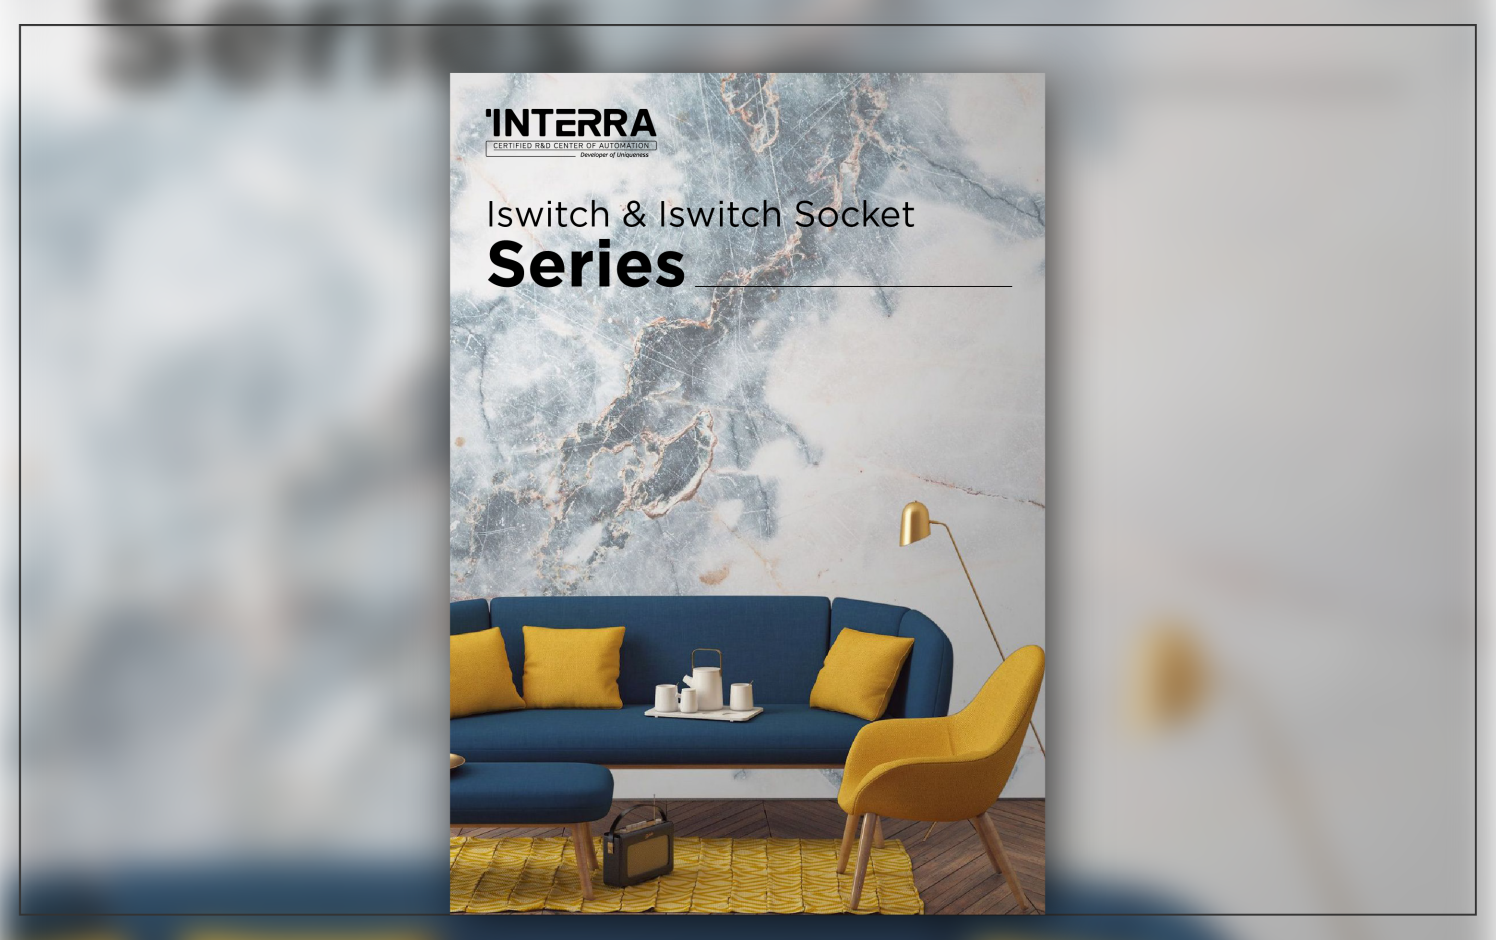 Iswitch & Socket Series